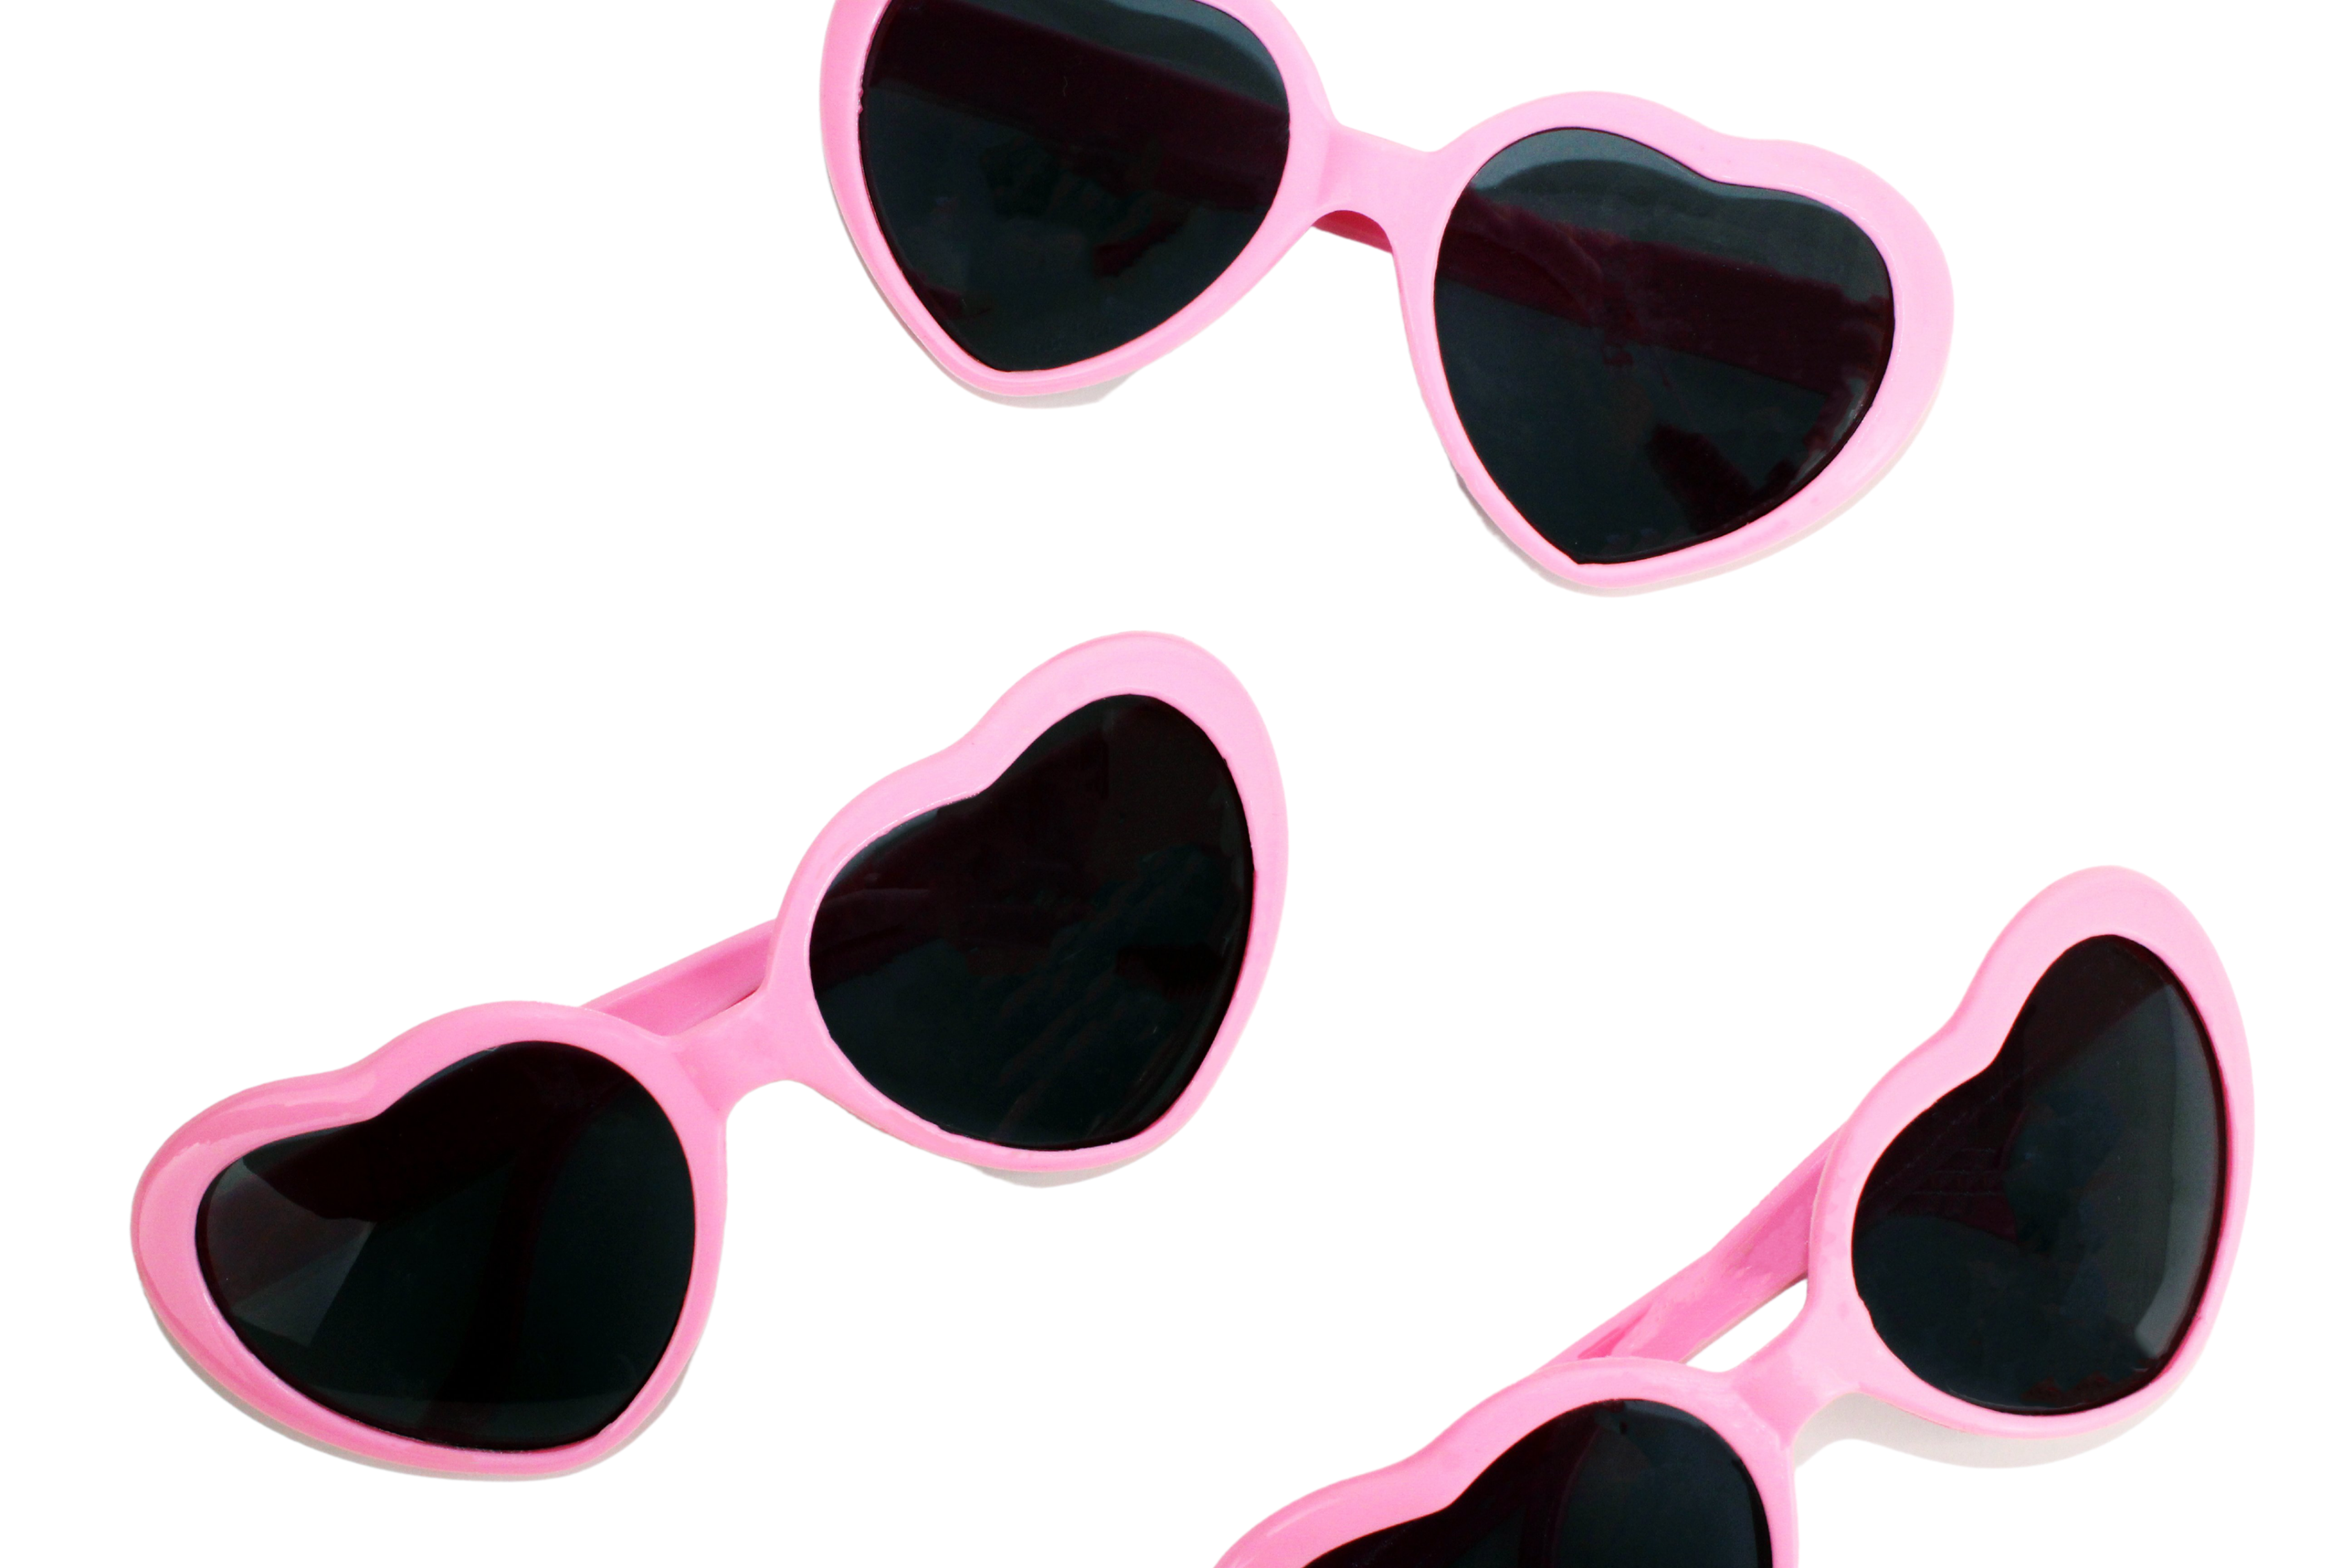 Teen/Adult Heart-Shaped Pink Sunglasses - Sparty Girl